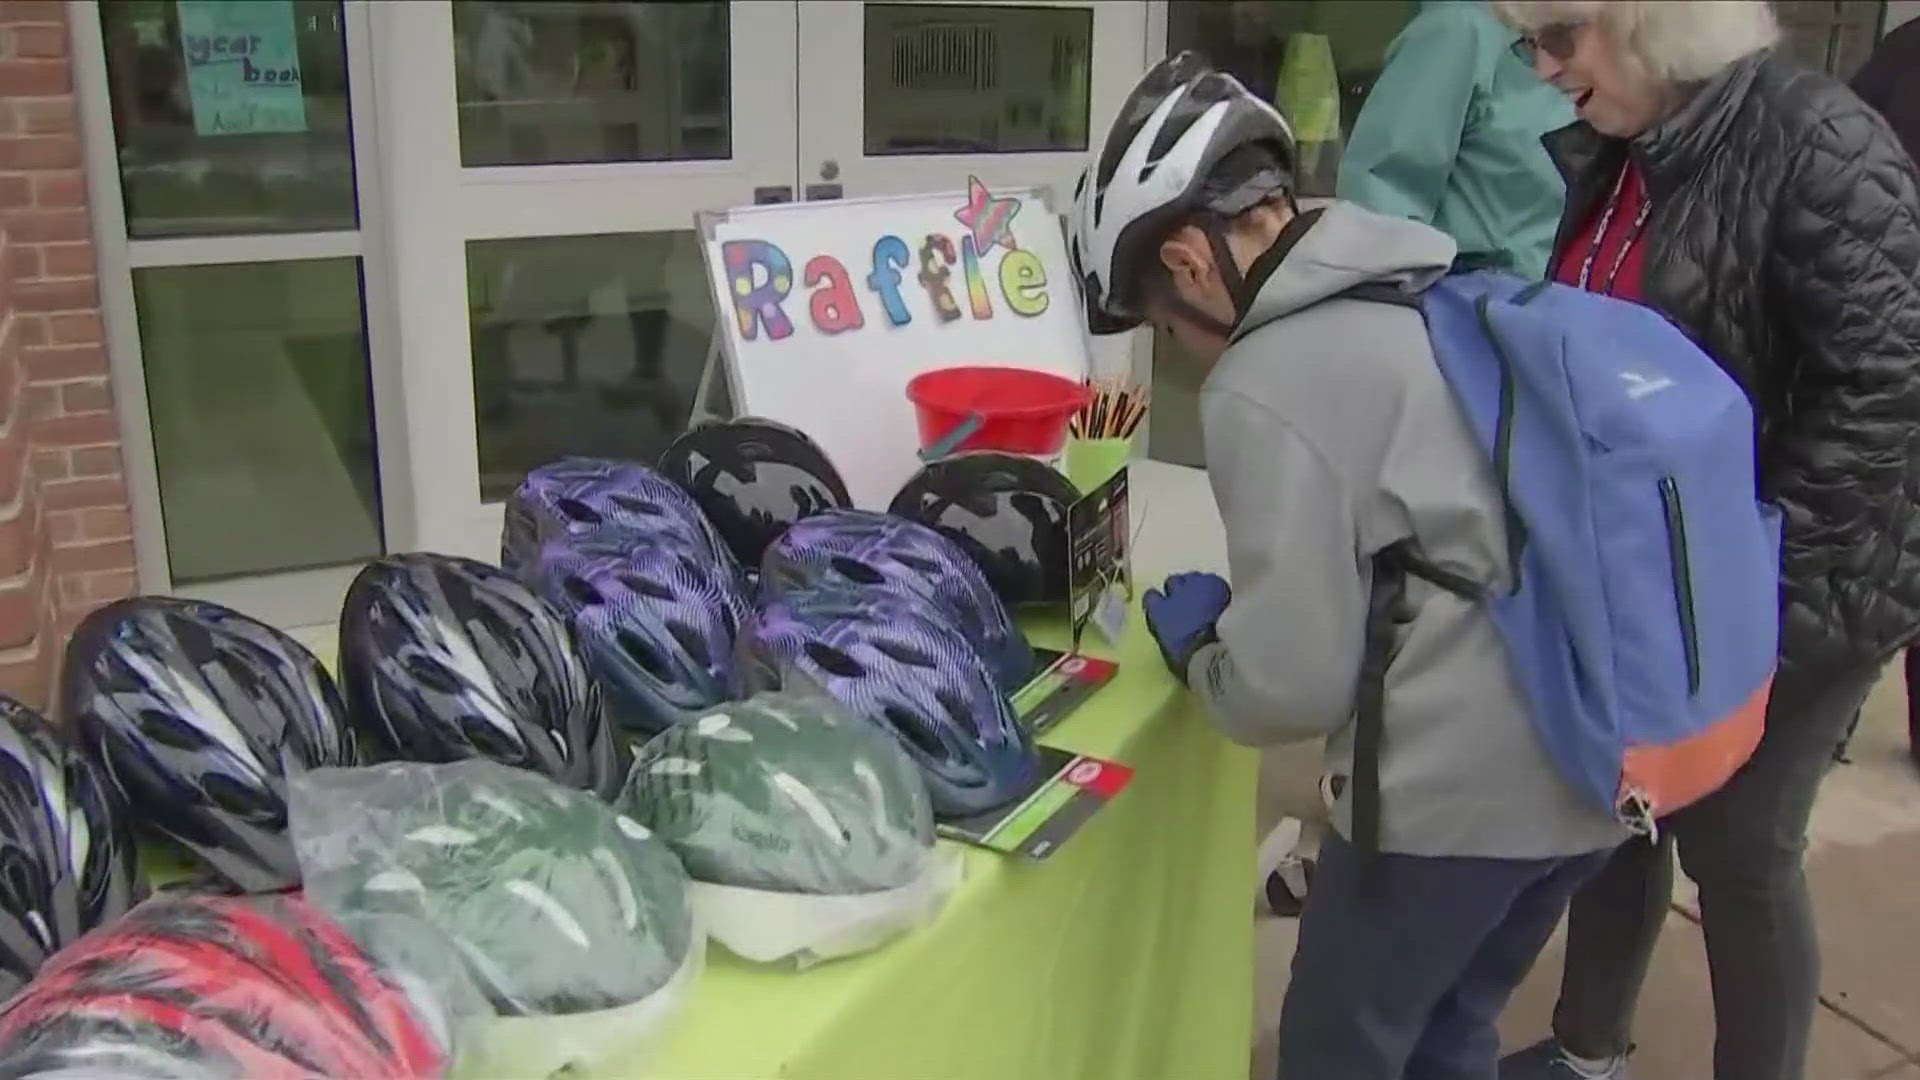 The event highlights the importance of safe active transportation to school.